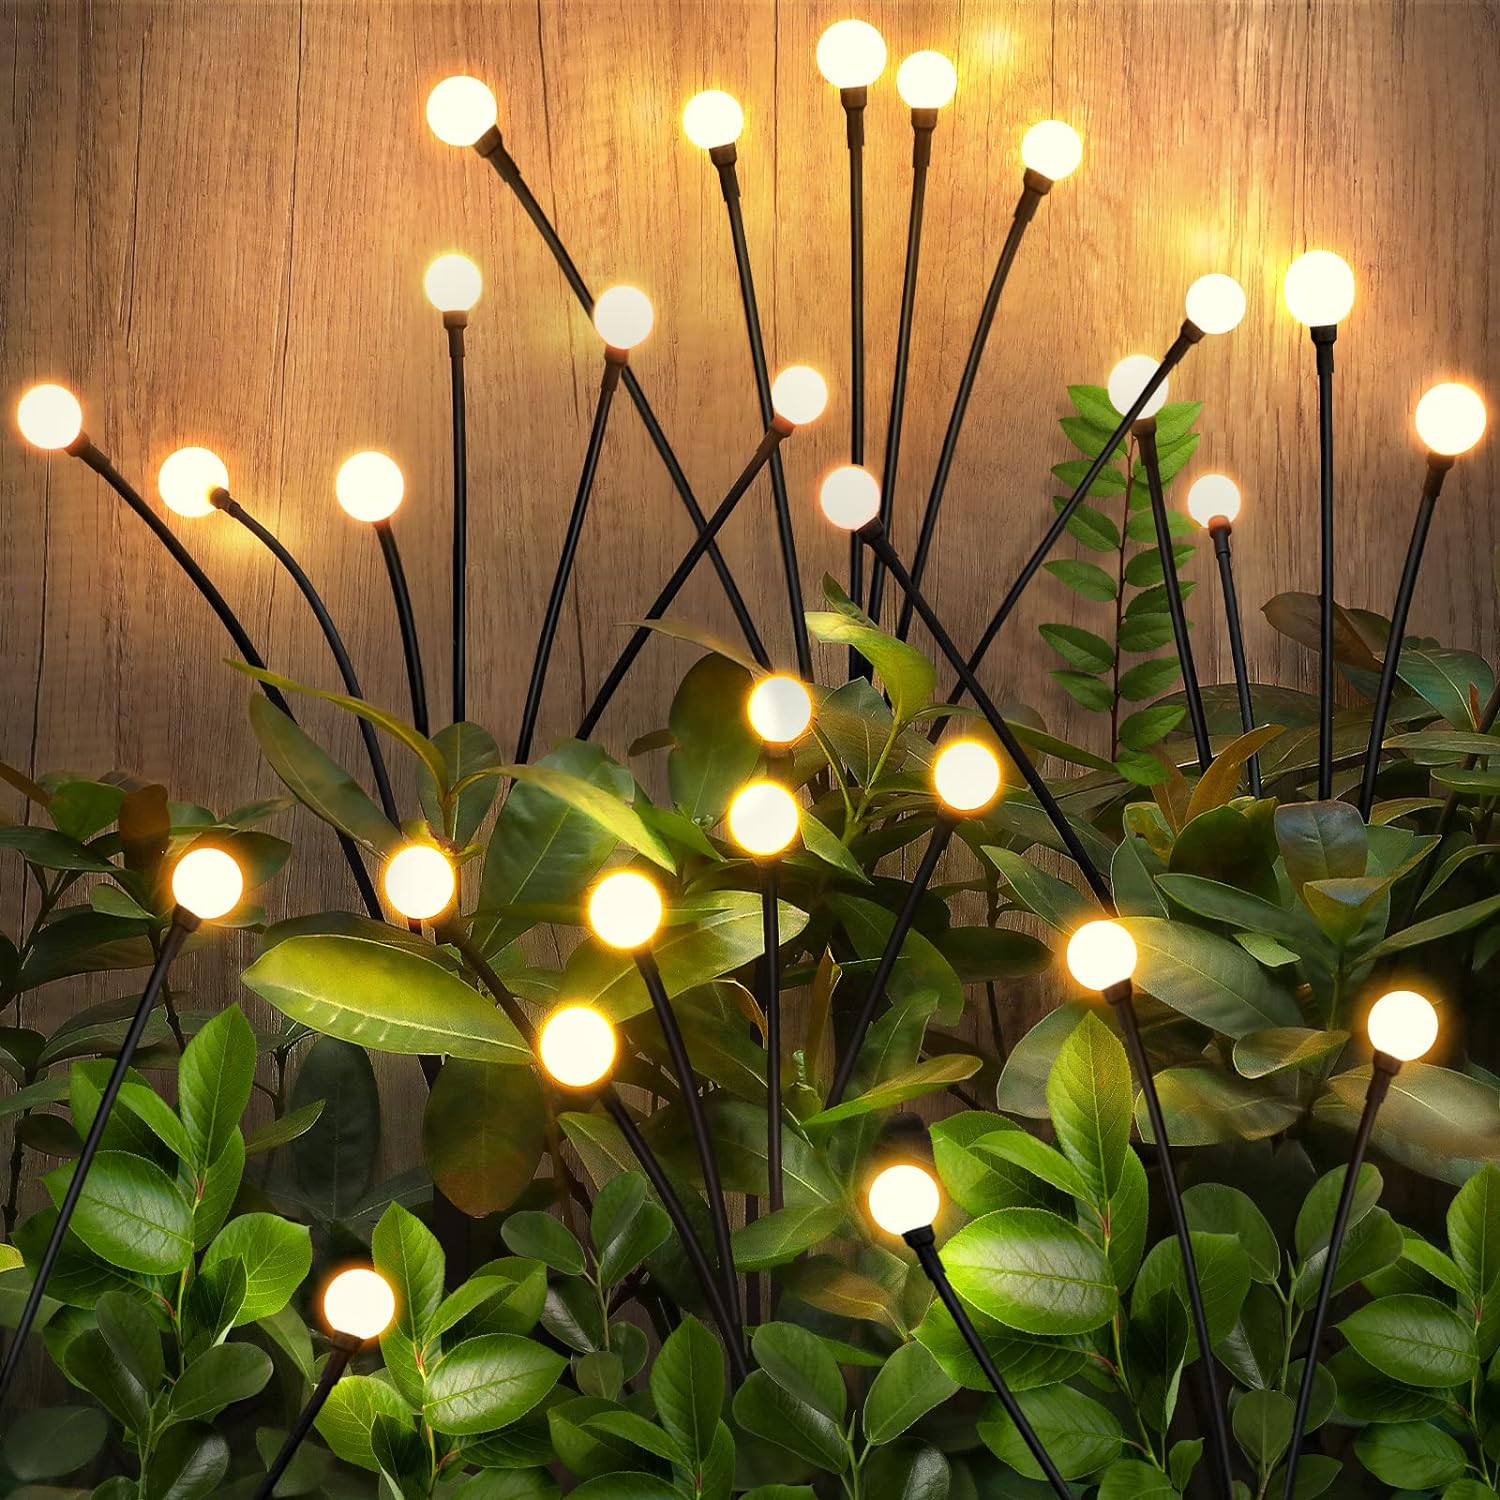 I am using these lights in my large plants. One inside my house and one outside. I like that they are easy to use. They are charged by the sun and come on in the evenings. They create great ambiant lighting. Ive had several months and they are holding up fine. I liked mine so much I gave some as a gift to a family member that really admired them. 4 for brightness just because they are brilliant and can see them from a distance but probably cant read by them. Beautiful!